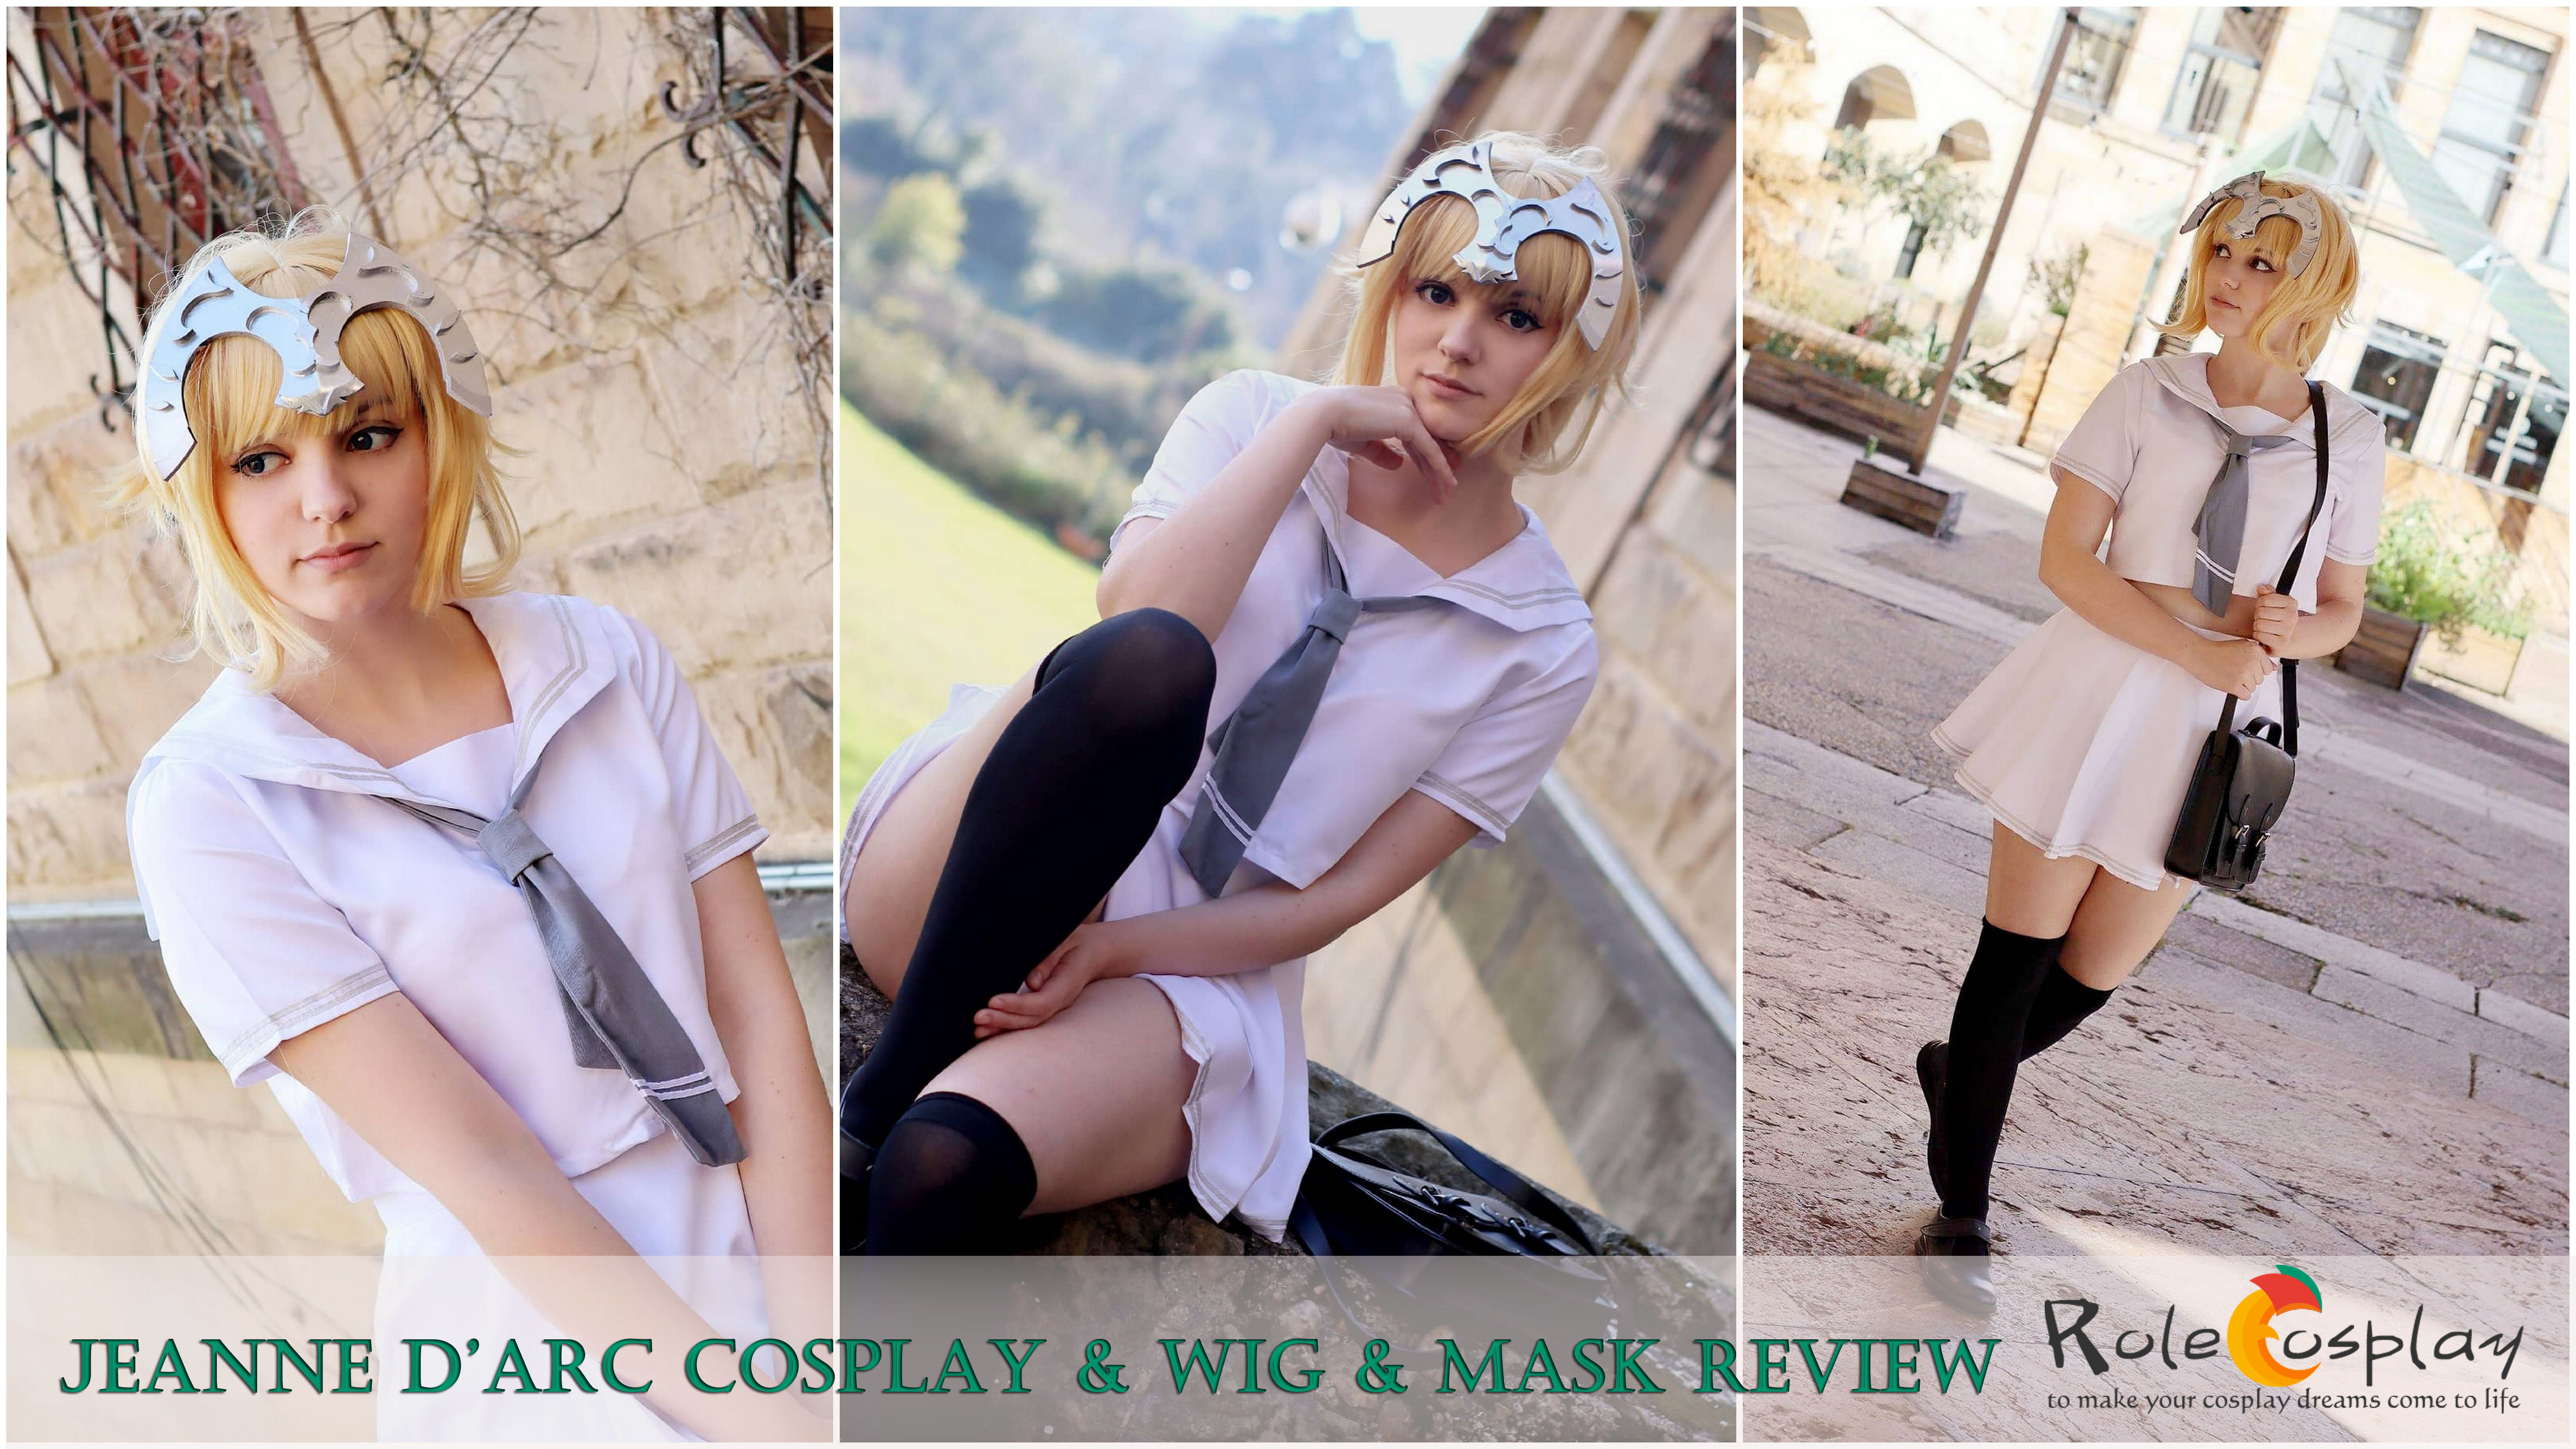 Jeanne D’Arc (white uniform) Cosplay, Wig and Mask Review from Rolecosplay